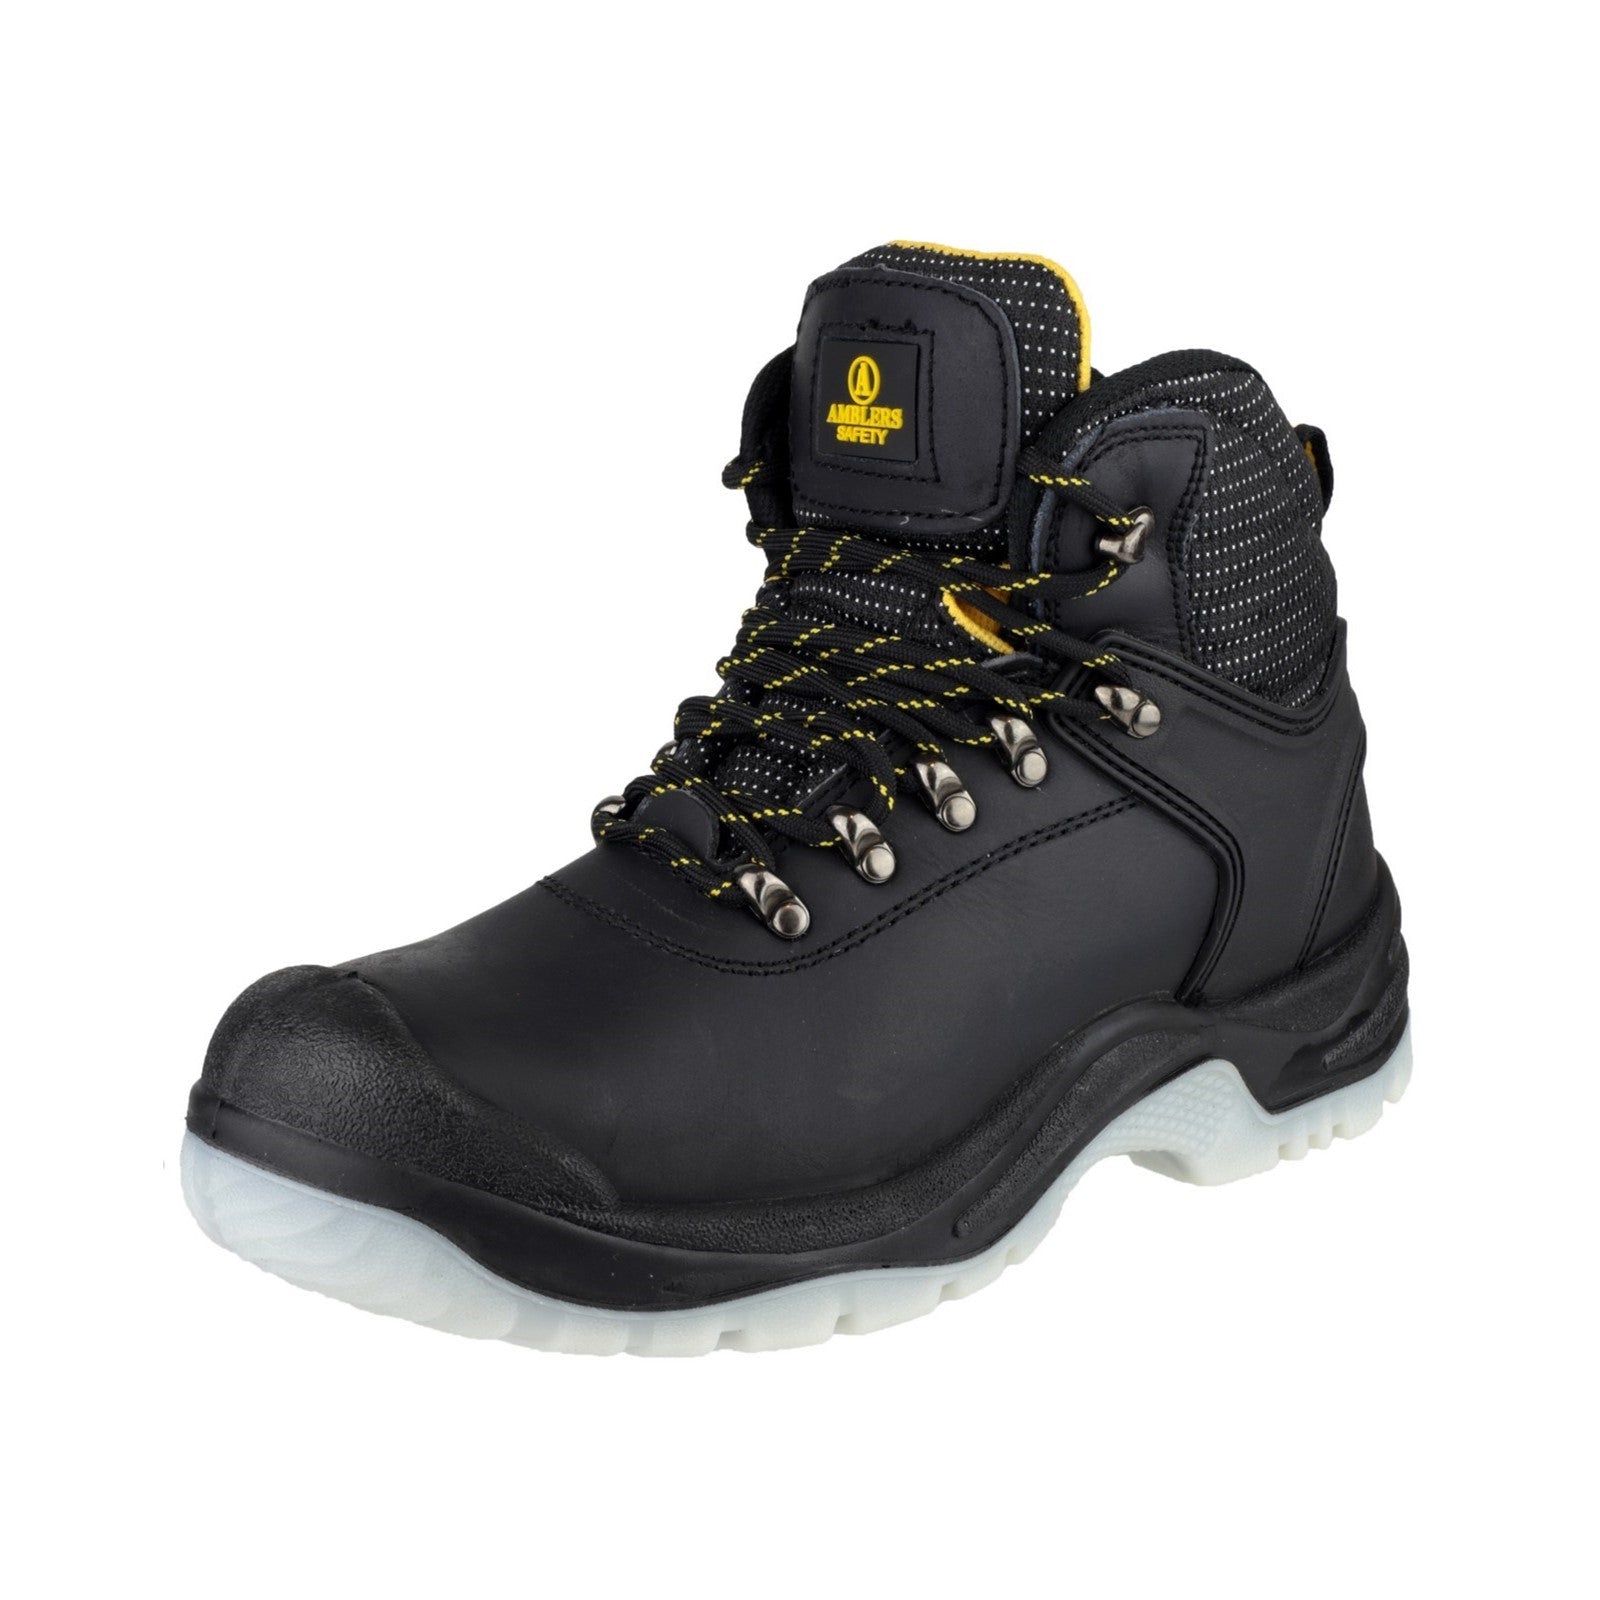 Amblers FS199 Hiker Safety Boot